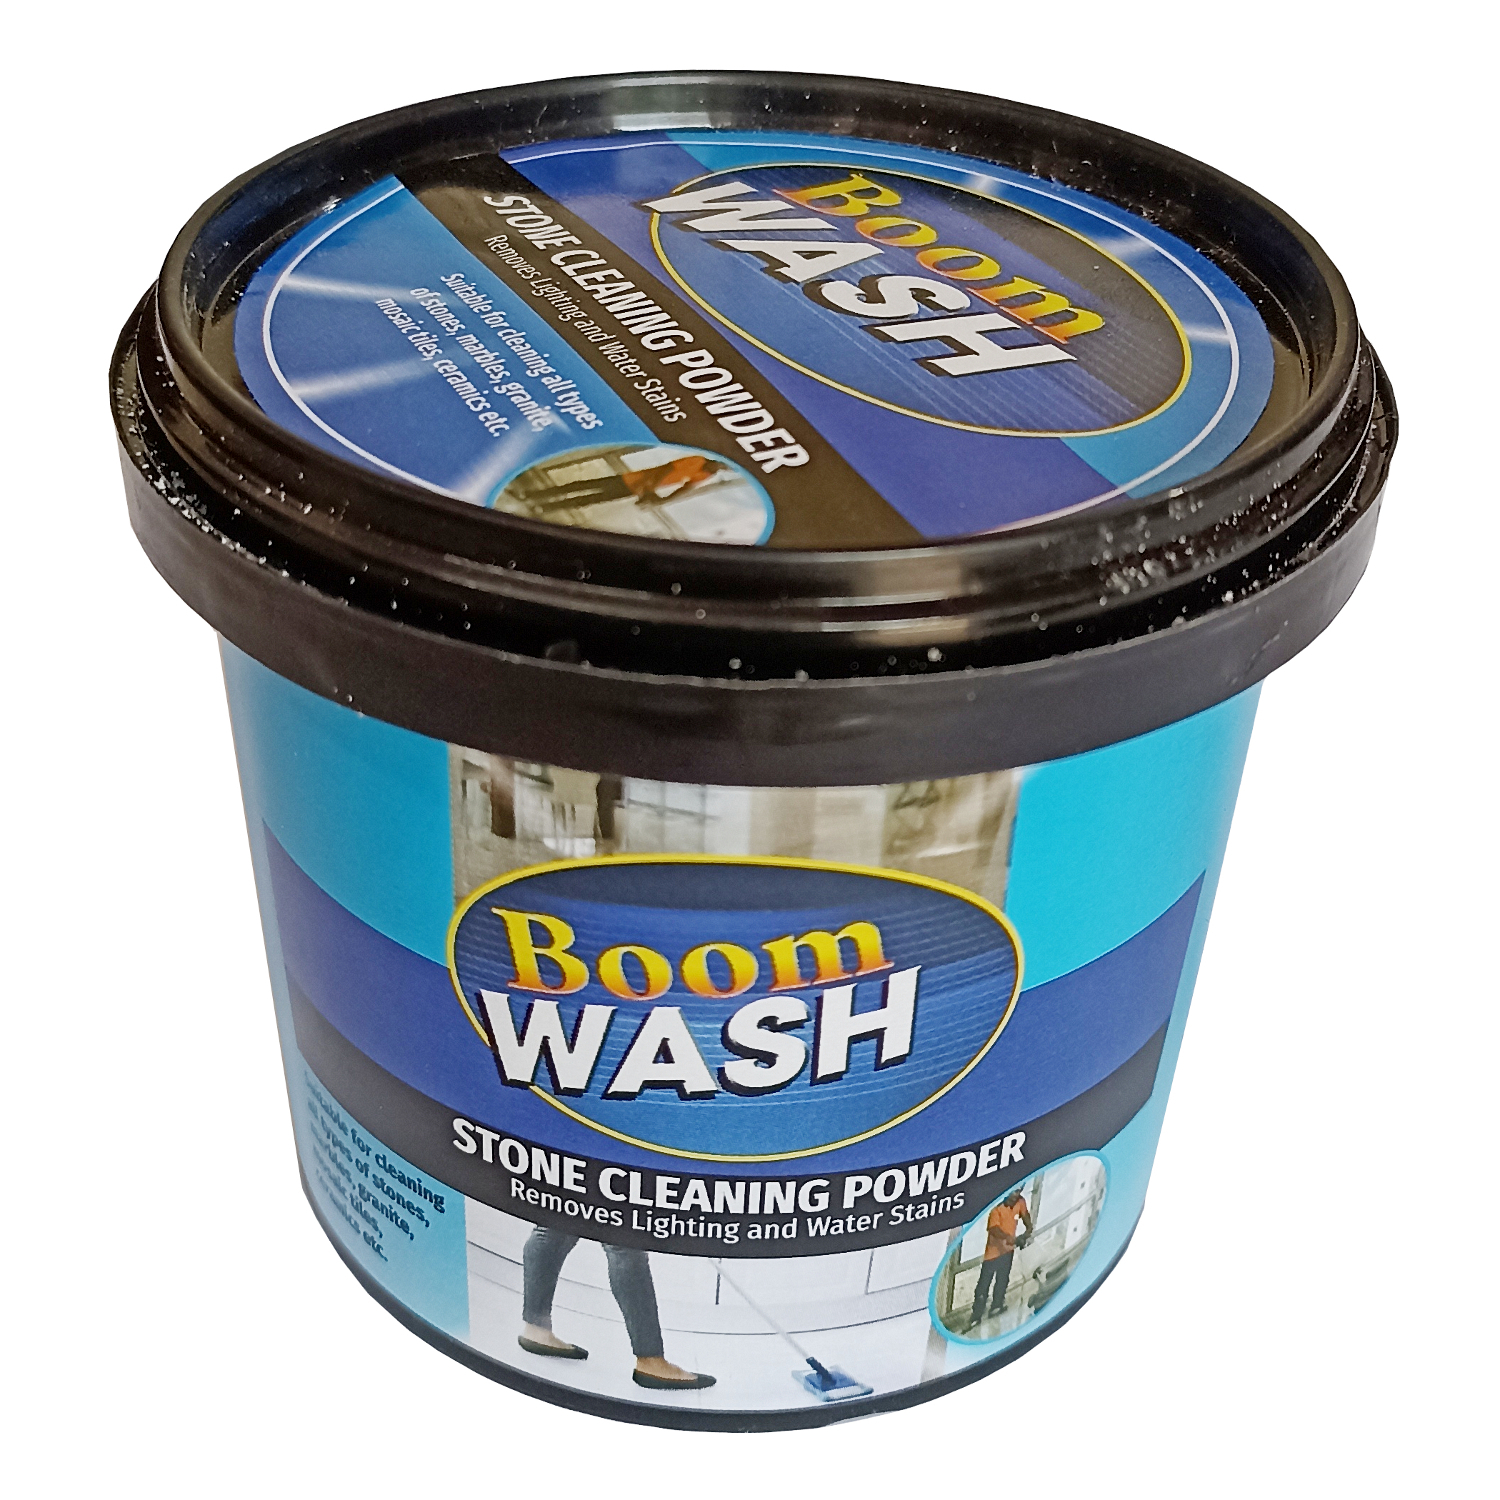 Stone Cleaning Powder